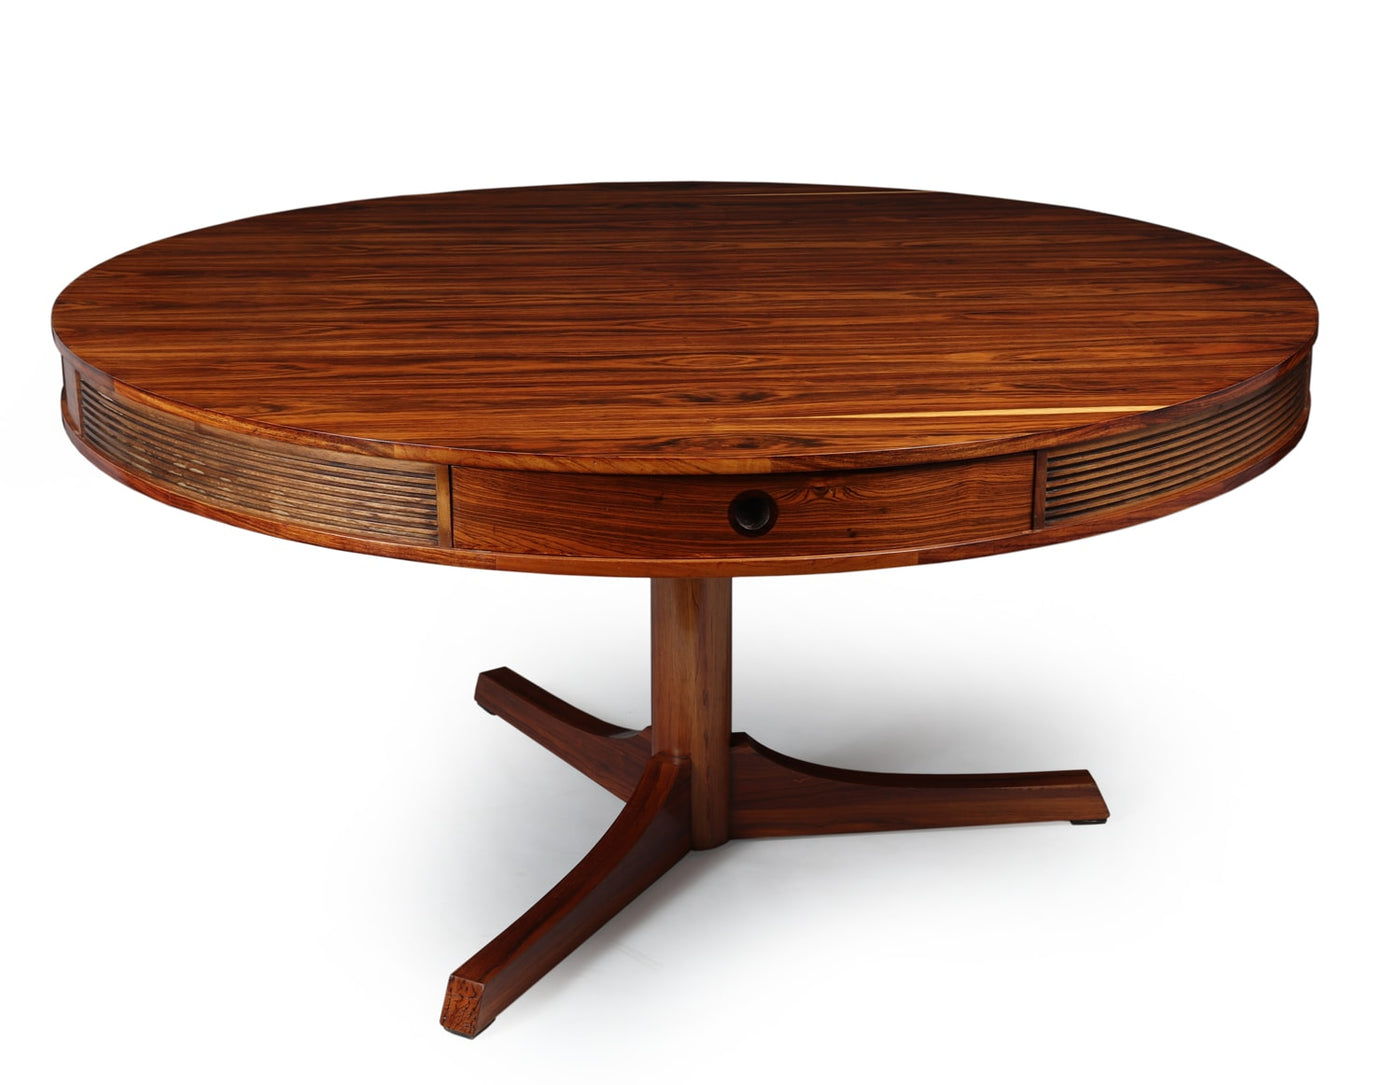 Rosewood Drum Table by Robert Heritage for Archie shine c1957